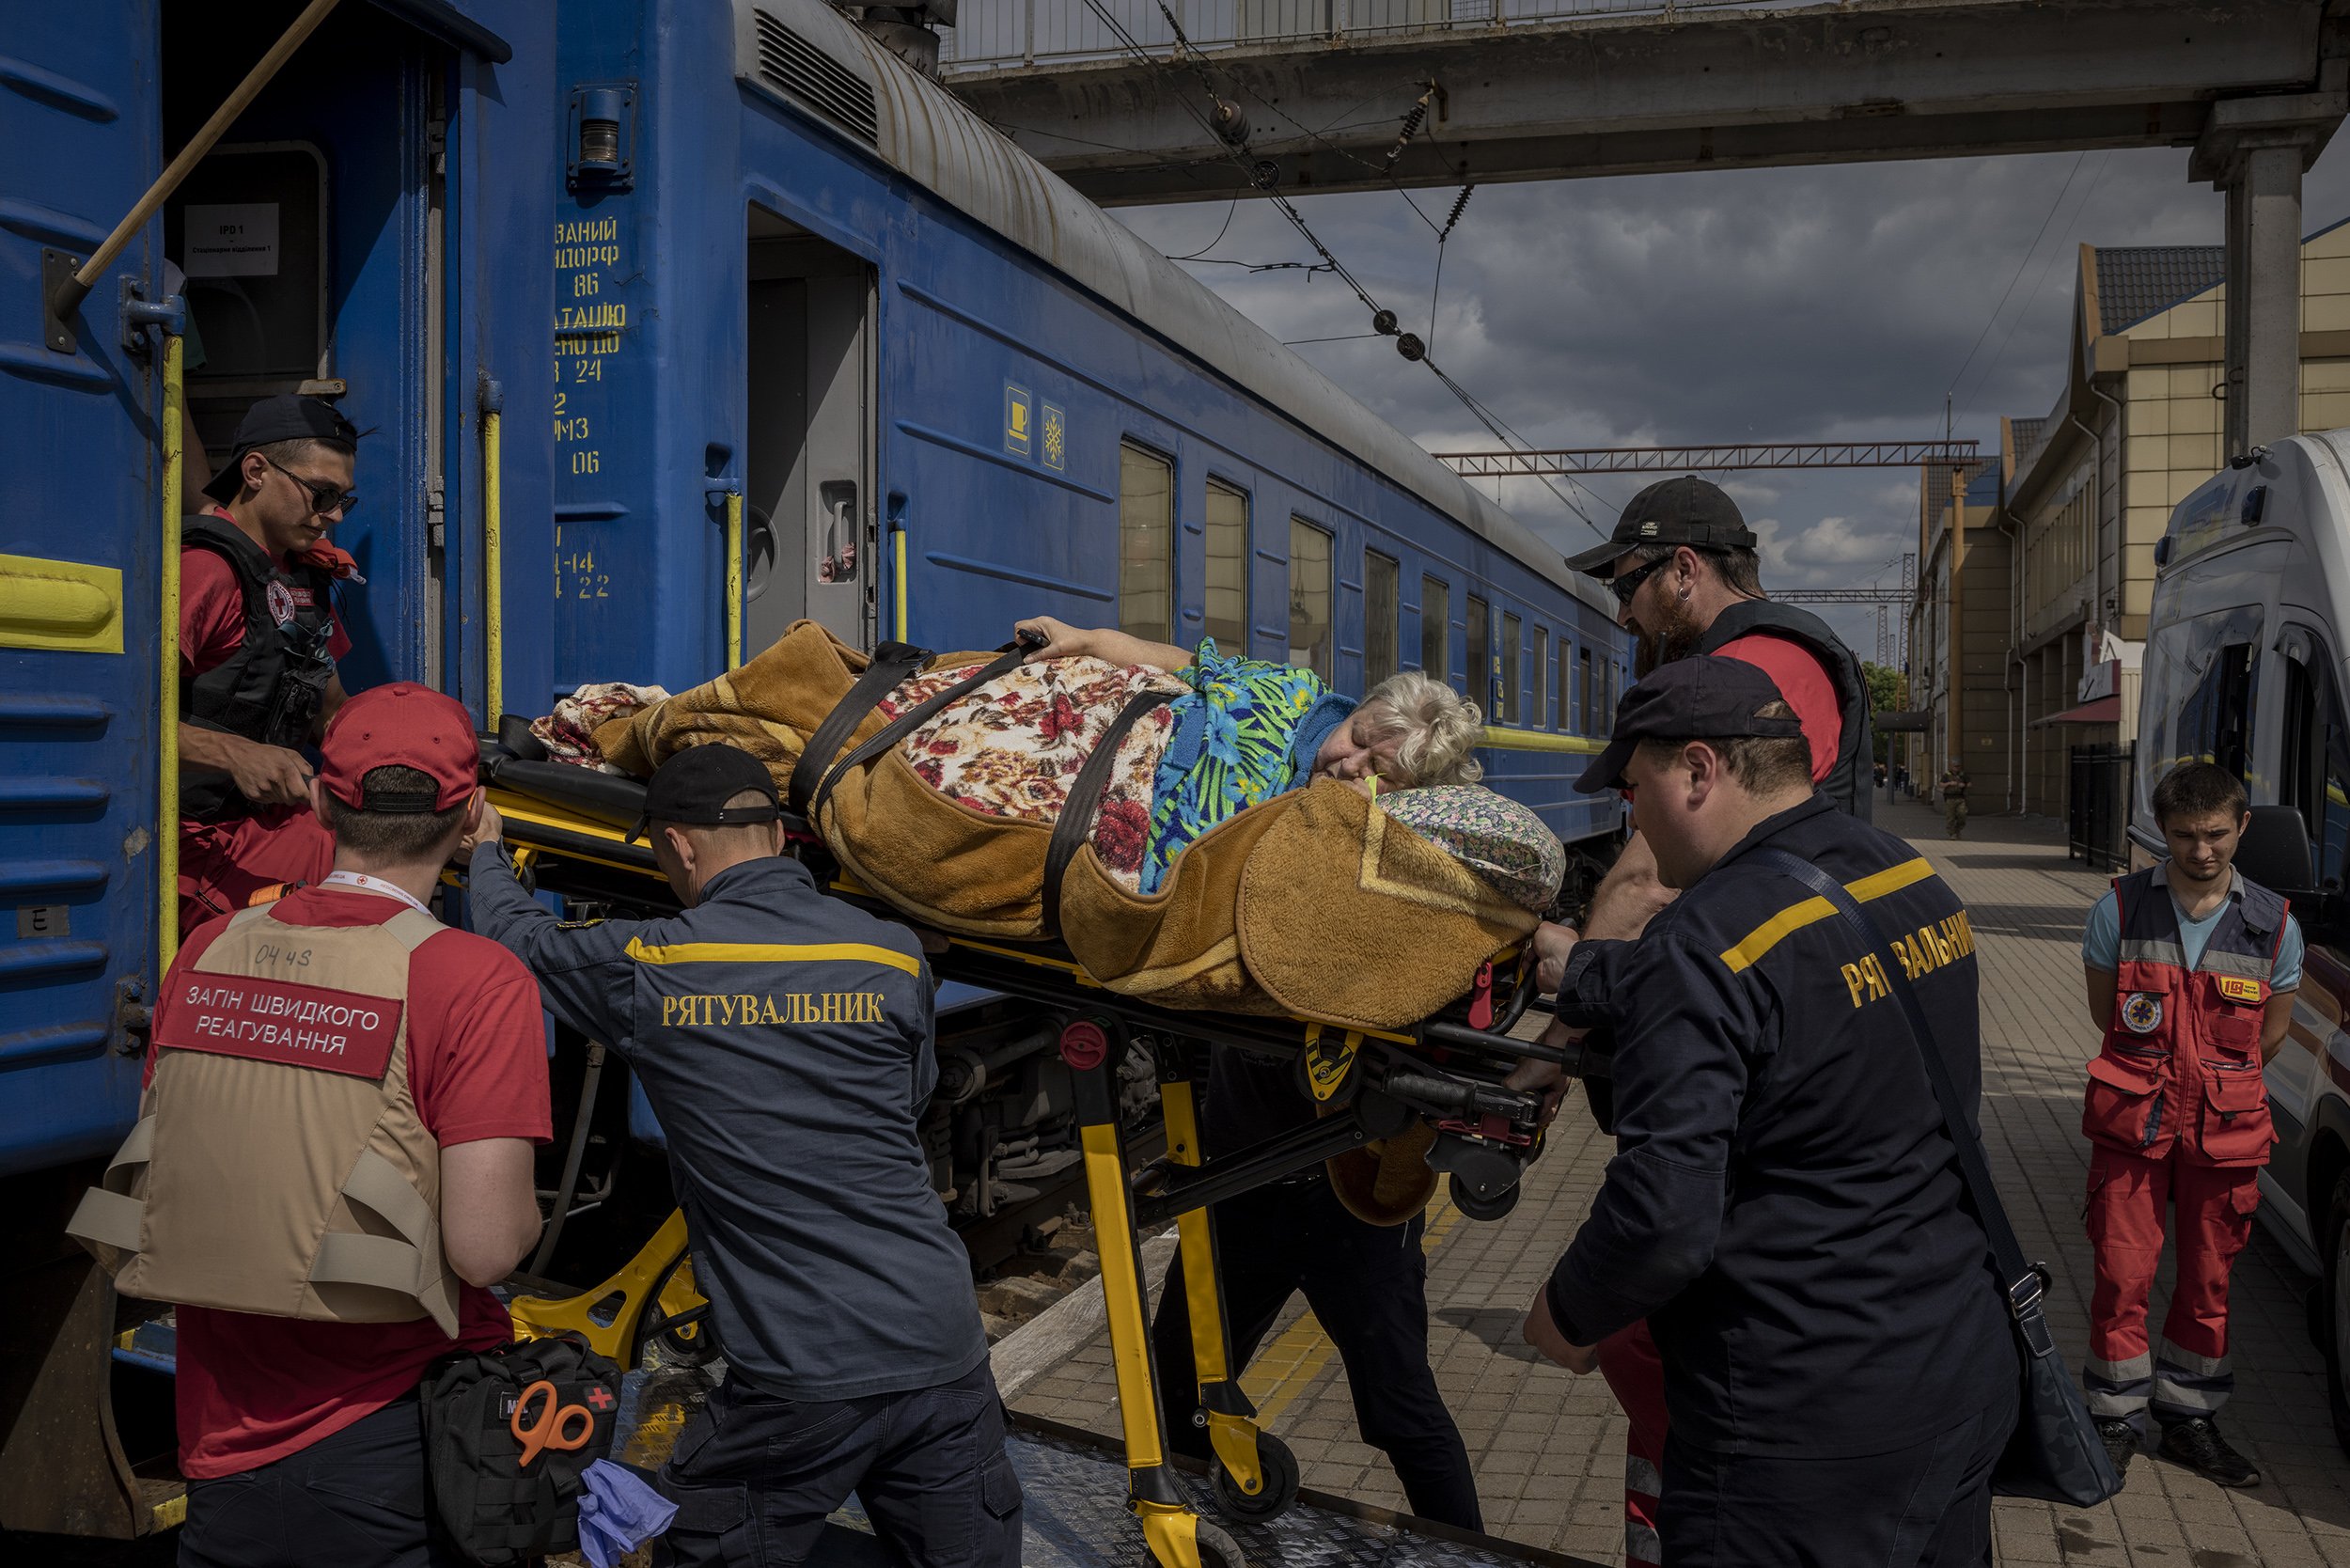  Elderly and sick civilians, along with their children and carers, boarded an MSF run medical evacuation train in Pokrovsk, in the Donetsk region of Ukraine. May, 2022. 